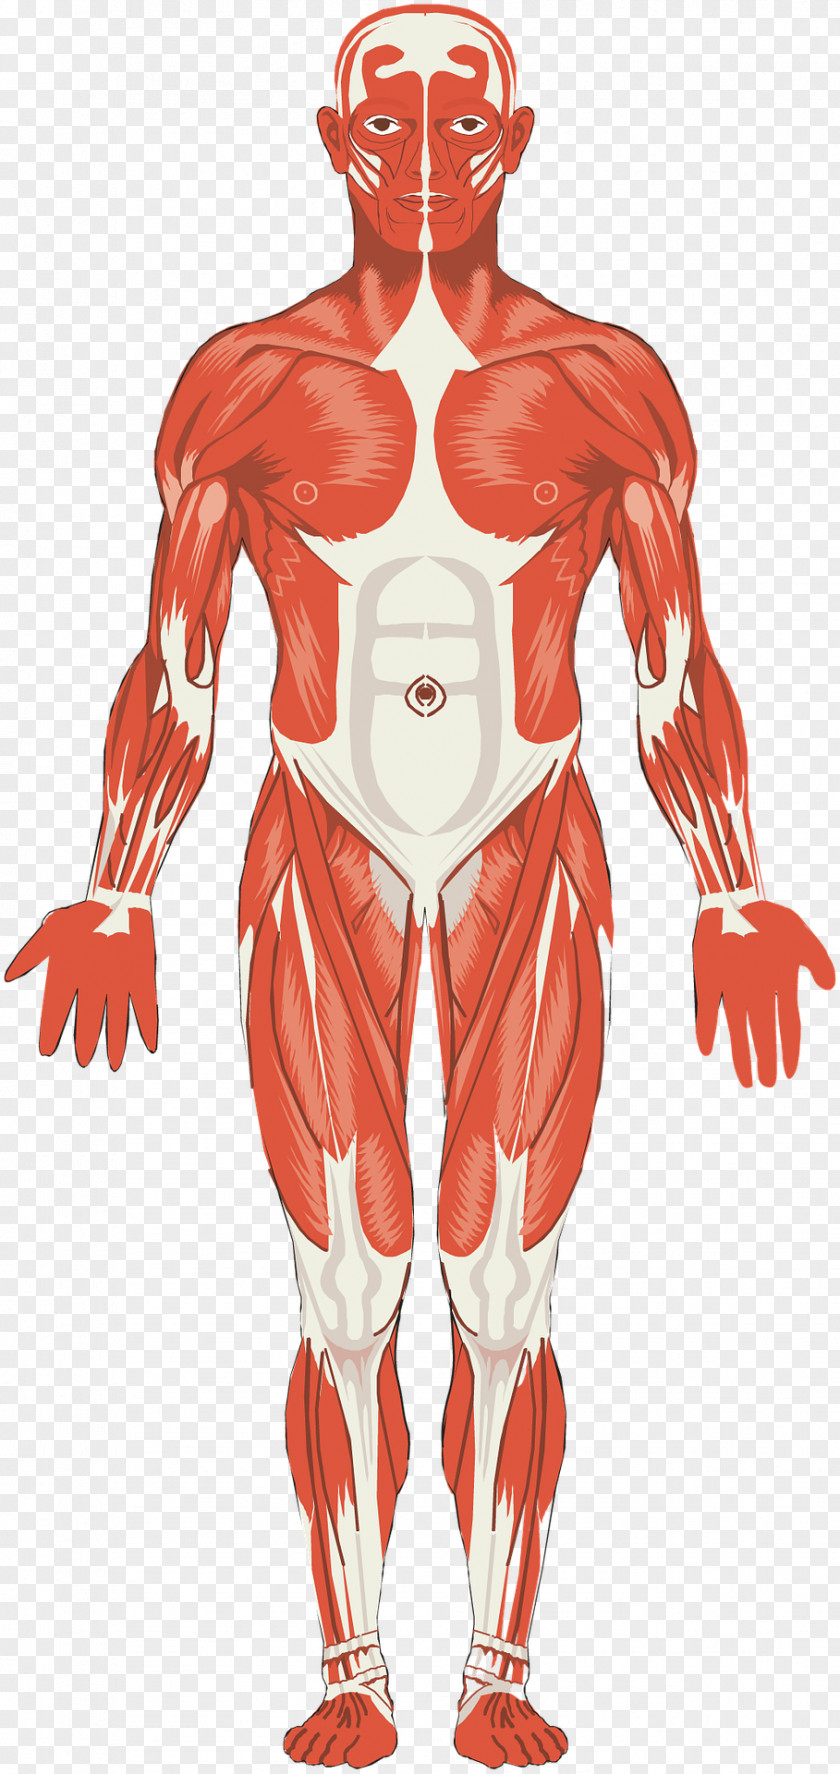 Muscular System Muscle Anatomy Organ Joint PNG system Joint, muscle clipart PNG